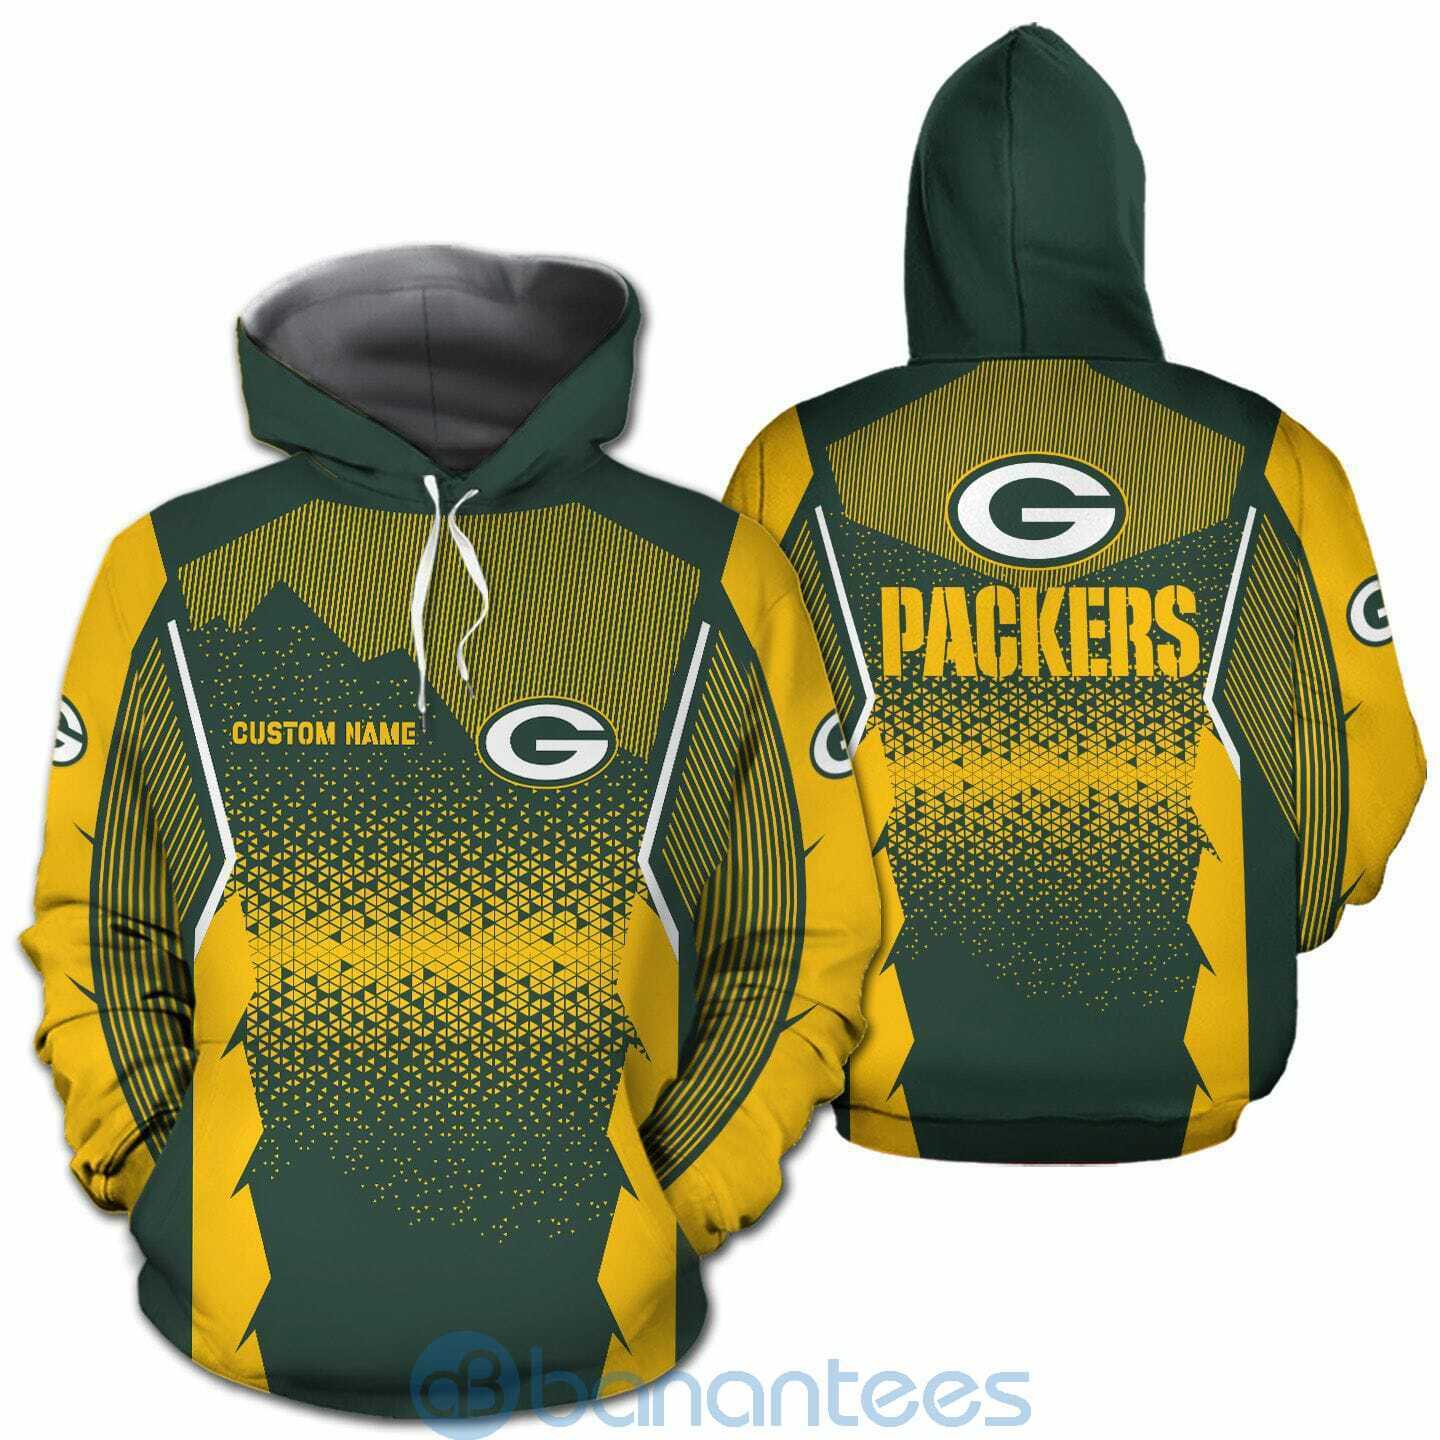 Green Bay Packers NFL Football Team Custom Name 3D All Over Printed Shirt For Fans